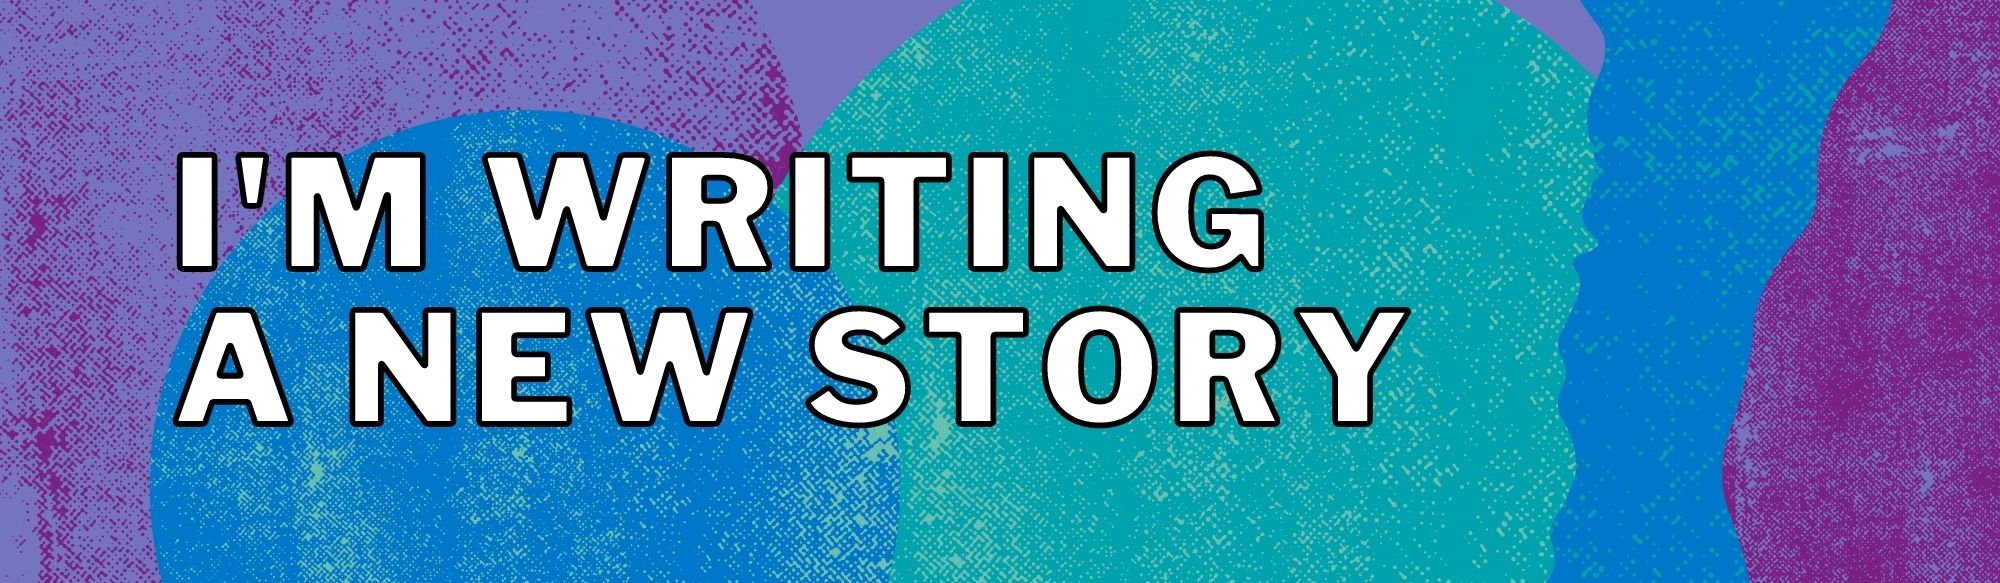 Graphic with the text "I'm writing a new story" on top of water-coloured blue and purple circles.